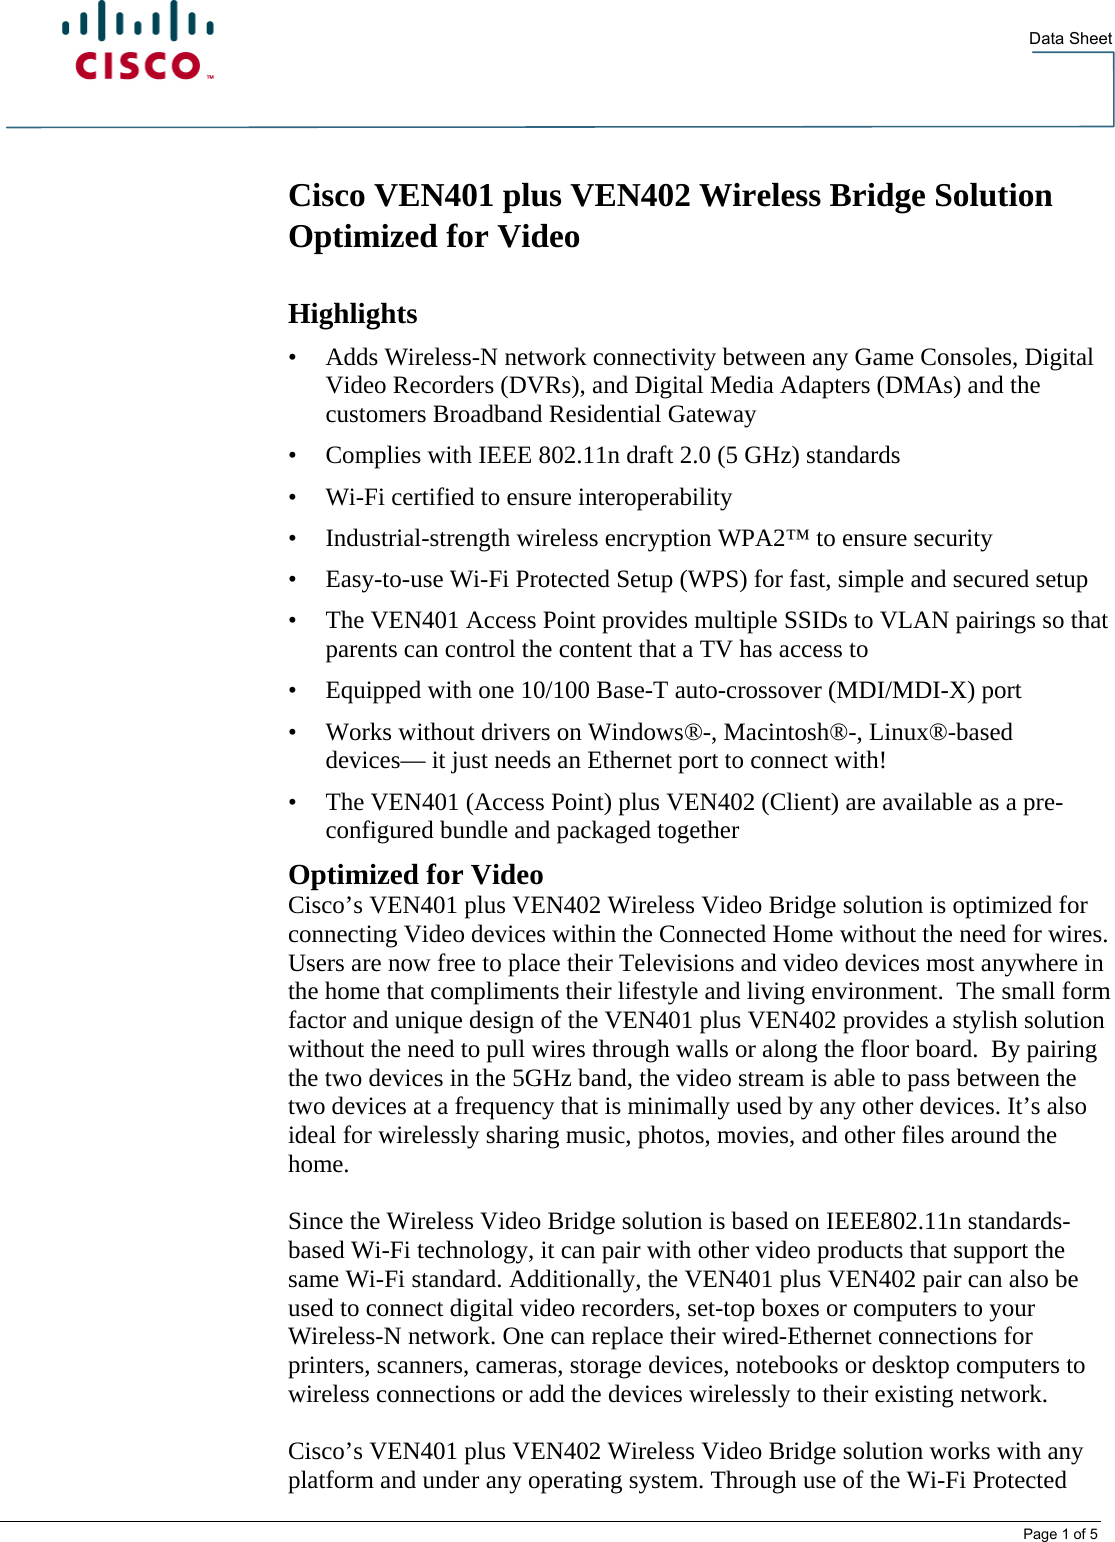   Data Sheet  Page 1 of 5 Cisco VEN401 plus VEN402 Wireless Bridge Solution Optimized for Video  Highlights • Adds Wireless-N network connectivity between any Game Consoles, Digital Video Recorders (DVRs), and Digital Media Adapters (DMAs) and the customers Broadband Residential Gateway • Complies with IEEE 802.11n draft 2.0 (5 GHz) standards • Wi-Fi certified to ensure interoperability • Industrial-strength wireless encryption WPA2™ to ensure security • Easy-to-use Wi-Fi Protected Setup (WPS) for fast, simple and secured setup  • The VEN401 Access Point provides multiple SSIDs to VLAN pairings so that parents can control the content that a TV has access to • Equipped with one 10/100 Base-T auto-crossover (MDI/MDI-X) port • Works without drivers on Windows®-, Macintosh®-, Linux®-based devices— it just needs an Ethernet port to connect with! • The VEN401 (Access Point) plus VEN402 (Client) are available as a pre-configured bundle and packaged together Optimized for Video Cisco’s VEN401 plus VEN402 Wireless Video Bridge solution is optimized for connecting Video devices within the Connected Home without the need for wires. Users are now free to place their Televisions and video devices most anywhere in the home that compliments their lifestyle and living environment.  The small form factor and unique design of the VEN401 plus VEN402 provides a stylish solution without the need to pull wires through walls or along the floor board.  By pairing the two devices in the 5GHz band, the video stream is able to pass between the two devices at a frequency that is minimally used by any other devices. It’s also ideal for wirelessly sharing music, photos, movies, and other files around the home.  Since the Wireless Video Bridge solution is based on IEEE802.11n standards-based Wi-Fi technology, it can pair with other video products that support the same Wi-Fi standard. Additionally, the VEN401 plus VEN402 pair can also be used to connect digital video recorders, set-top boxes or computers to your Wireless-N network. One can replace their wired-Ethernet connections for printers, scanners, cameras, storage devices, notebooks or desktop computers to wireless connections or add the devices wirelessly to their existing network.  Cisco’s VEN401 plus VEN402 Wireless Video Bridge solution works with any platform and under any operating system. Through use of the Wi-Fi Protected 